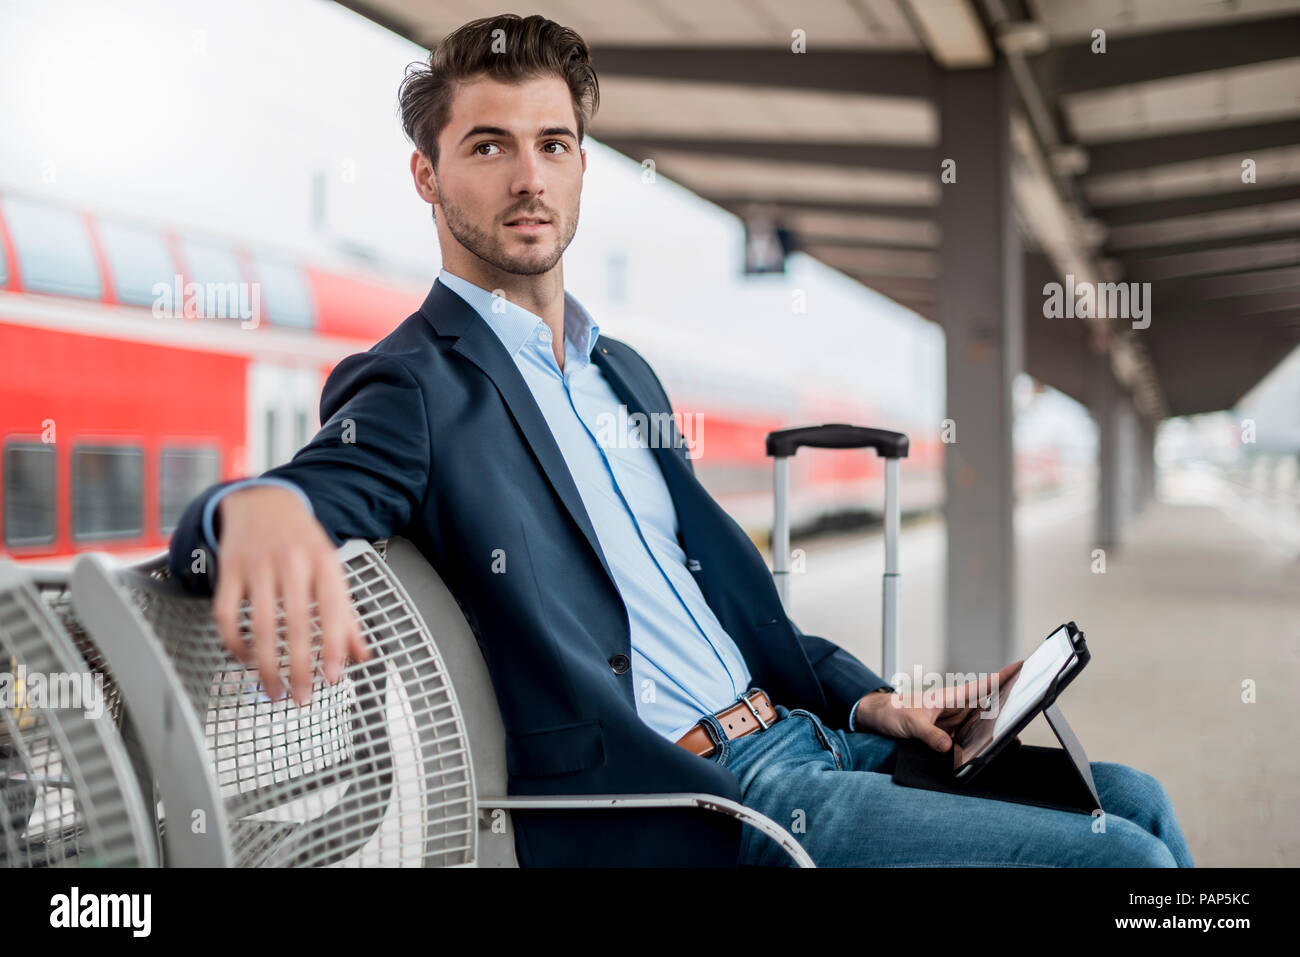 Businessman at the station using tablet Stock Photo